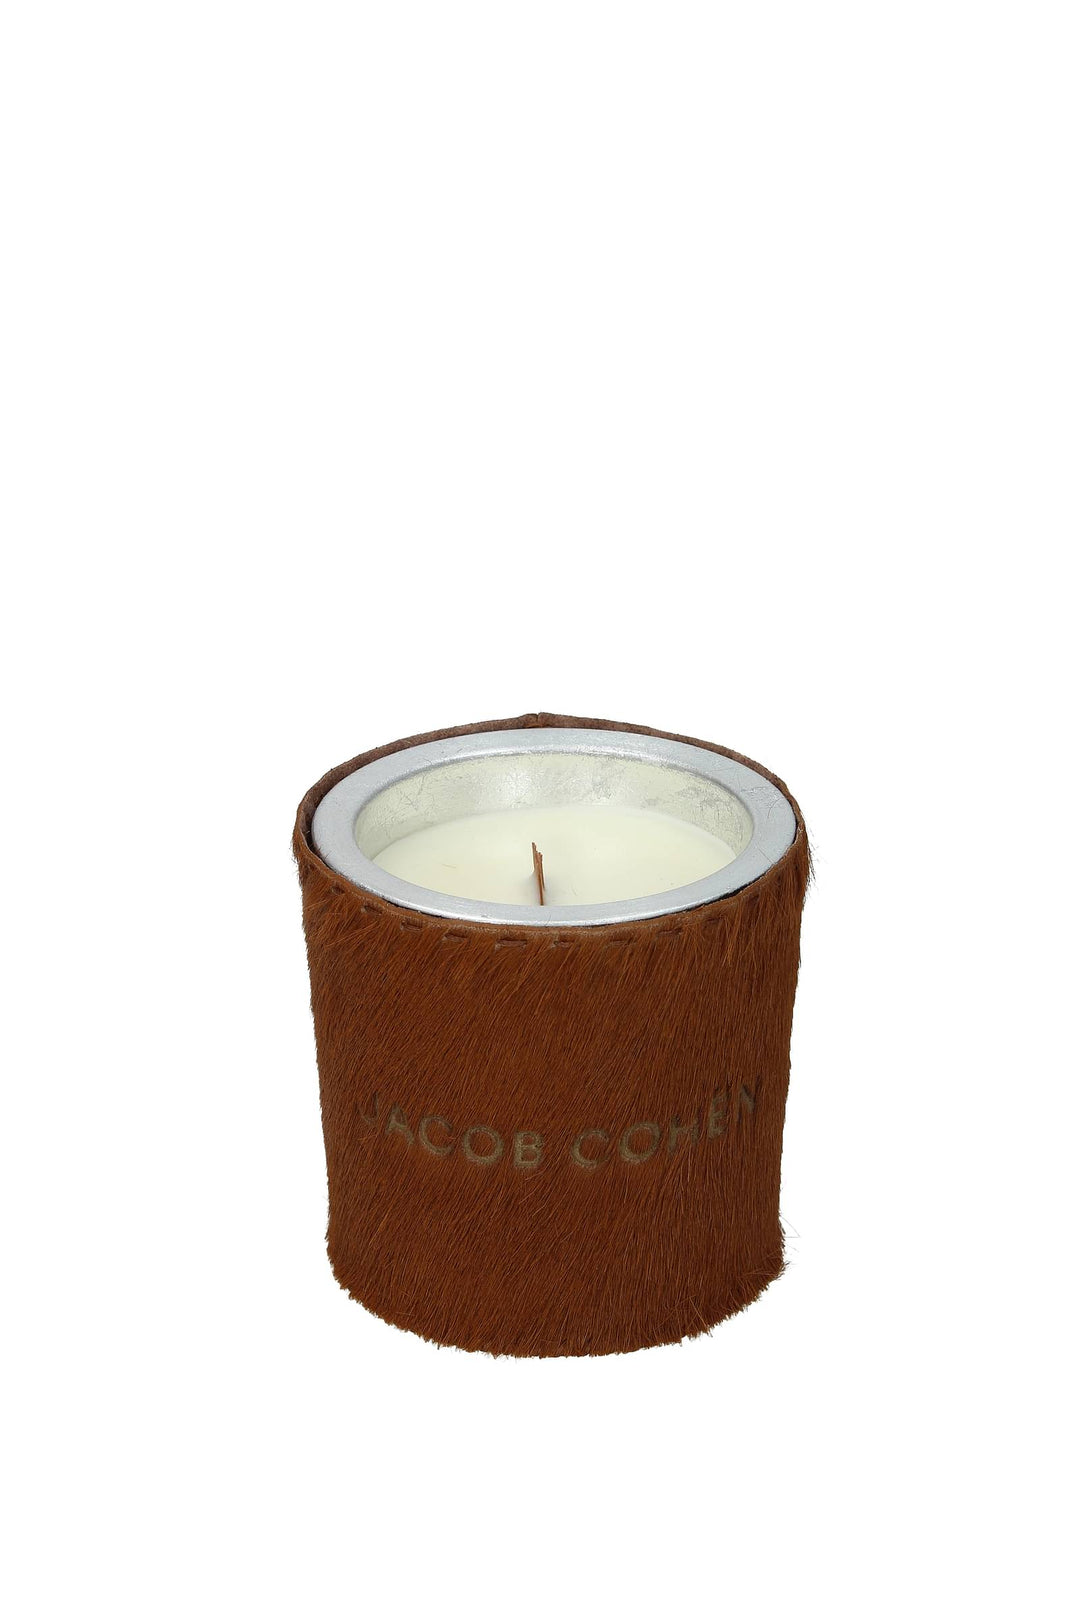 Idee Regalo Handmade Scented Soy Candle Cavallino Marrone Tabacco - Jacob Cohen - Donna